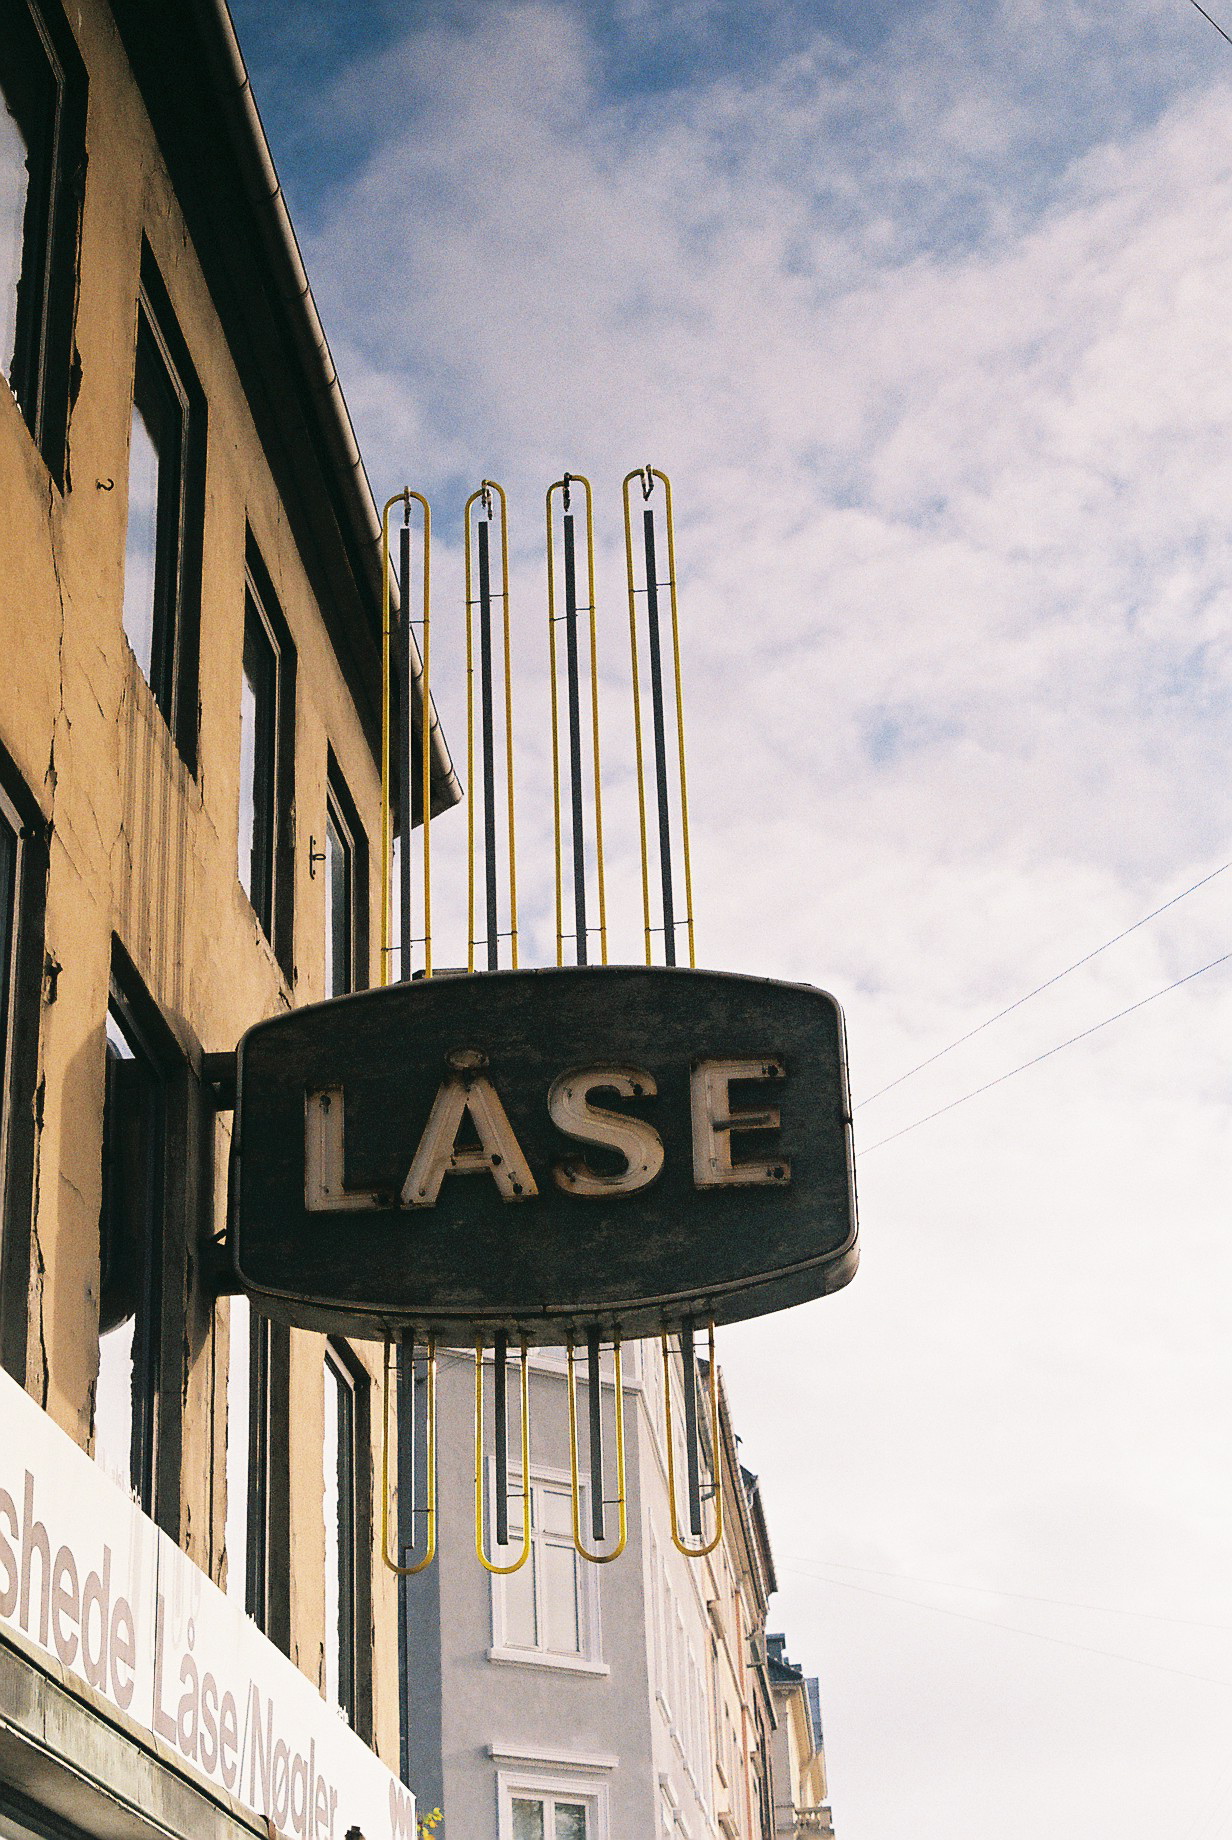 the sign for laser on the side of a building